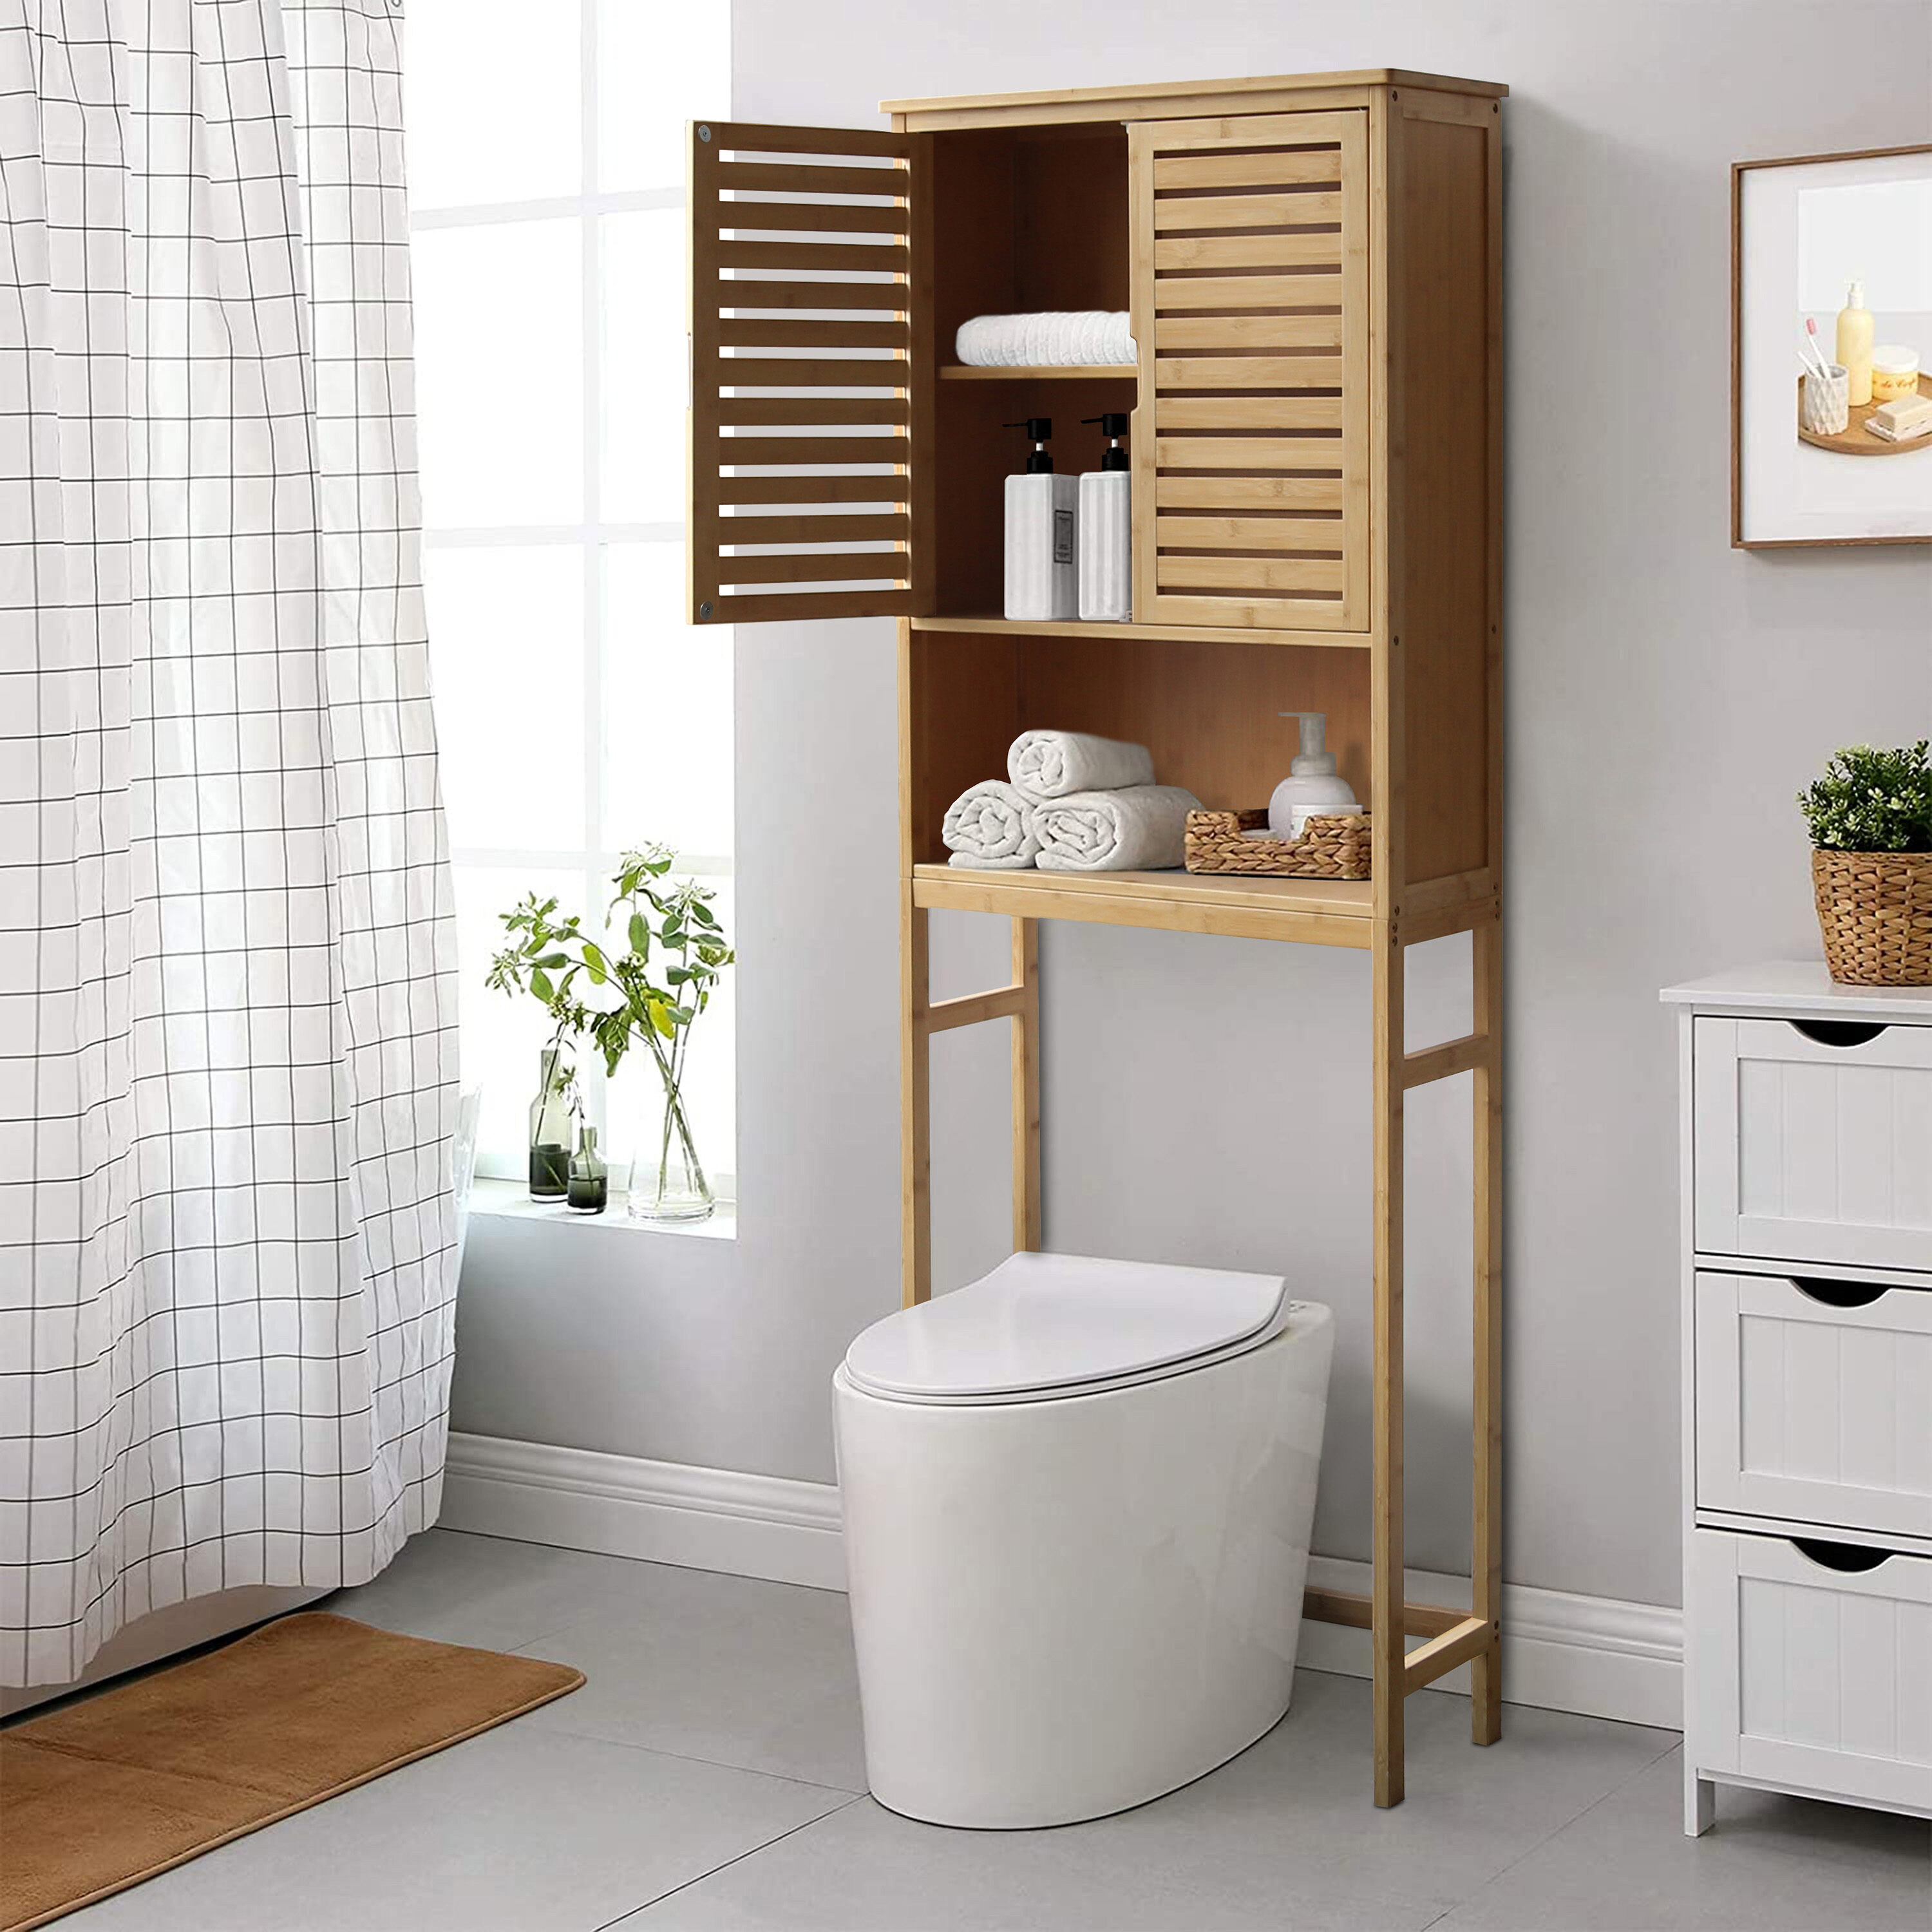 Wall Mount Bathroom Furniture Bamboo 3-Tier Over-The-Toilet Space Saver  Organizer Rack Over The Toilet Storage - China Bathroom Cabinet, Bathroom  Storage